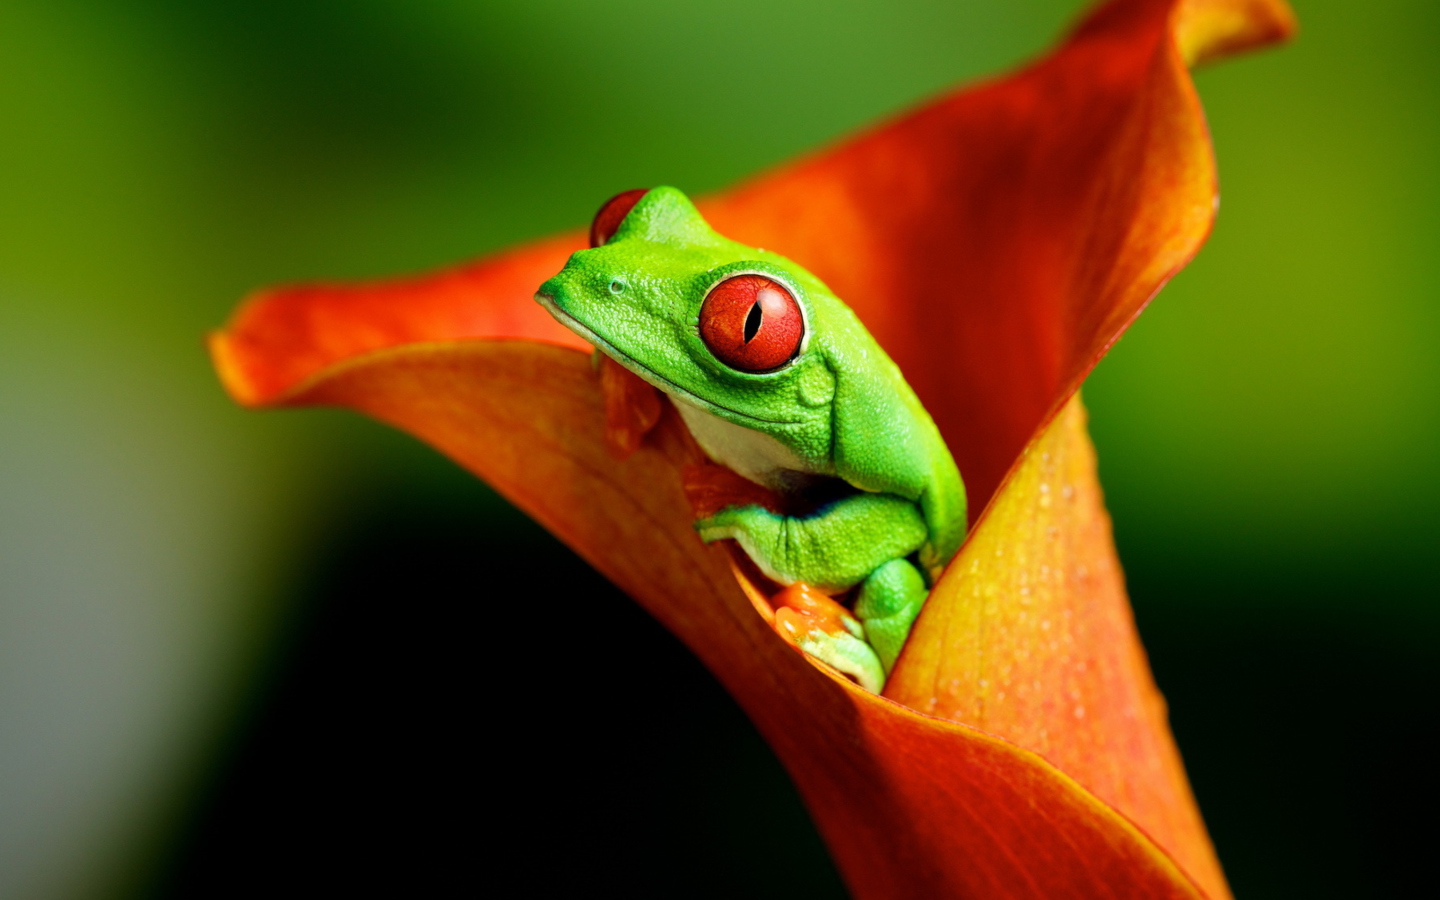 Red Eyed Green Frog wallpaper 1440x900